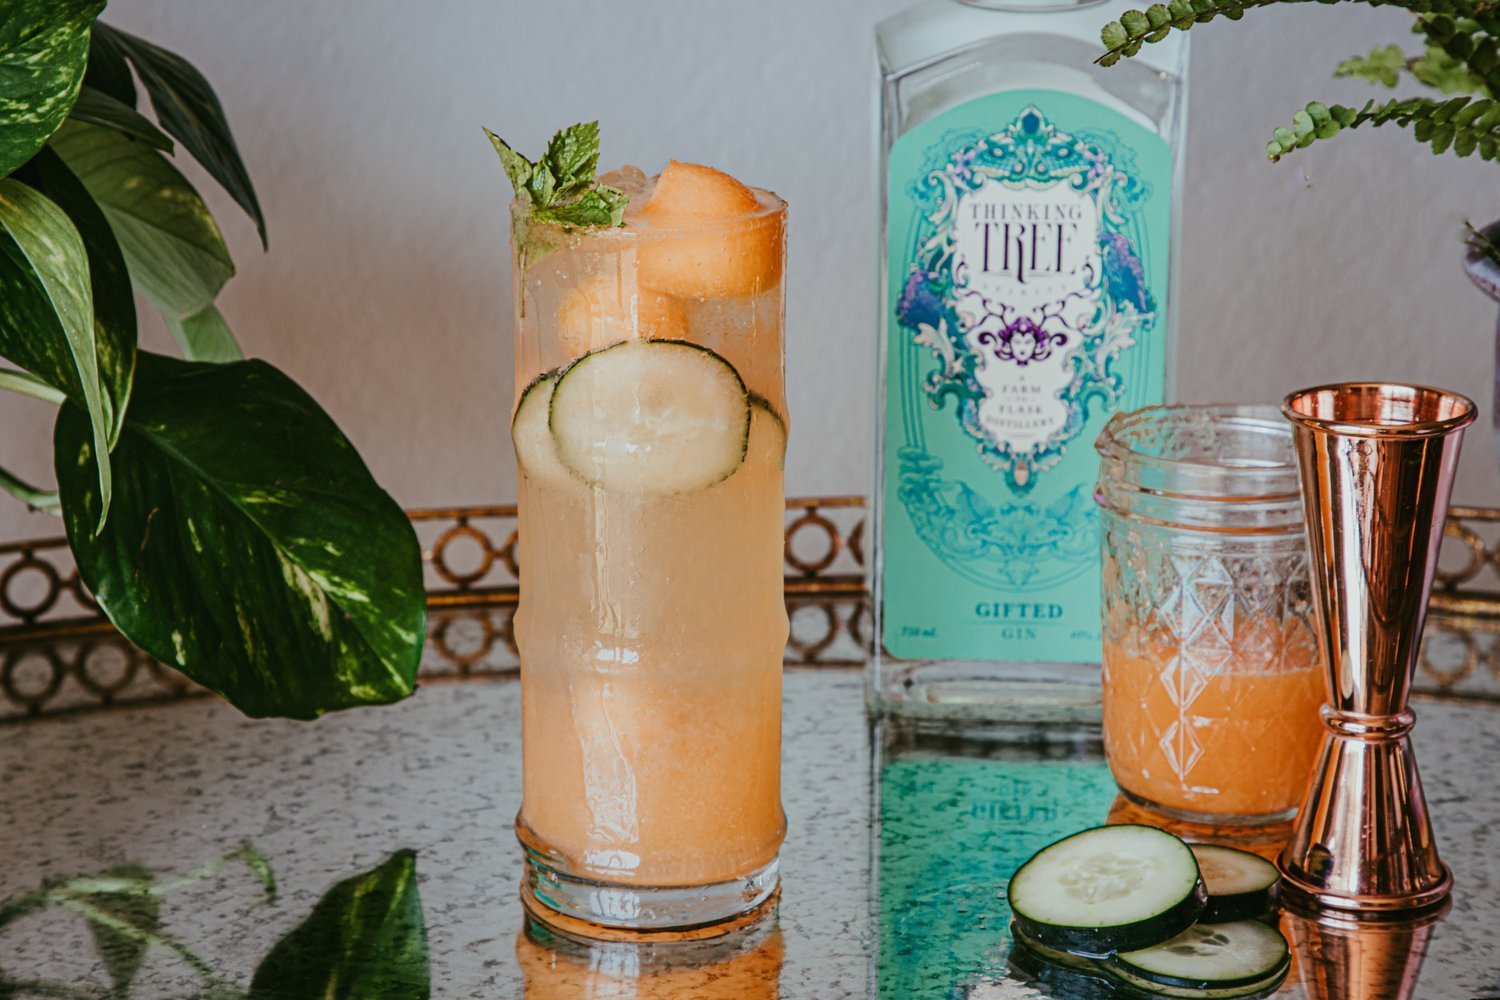 Beat the heat with our Melon Spritzer featuring our Gifted Gin. From the rich, sweet juniper aromas to the subtle cucumber and chamomile finish, it's the ultimate weekend companion. Recipe below. 

2 ounces melon simple syrup 
1.5 ounces Gifted Gin 
